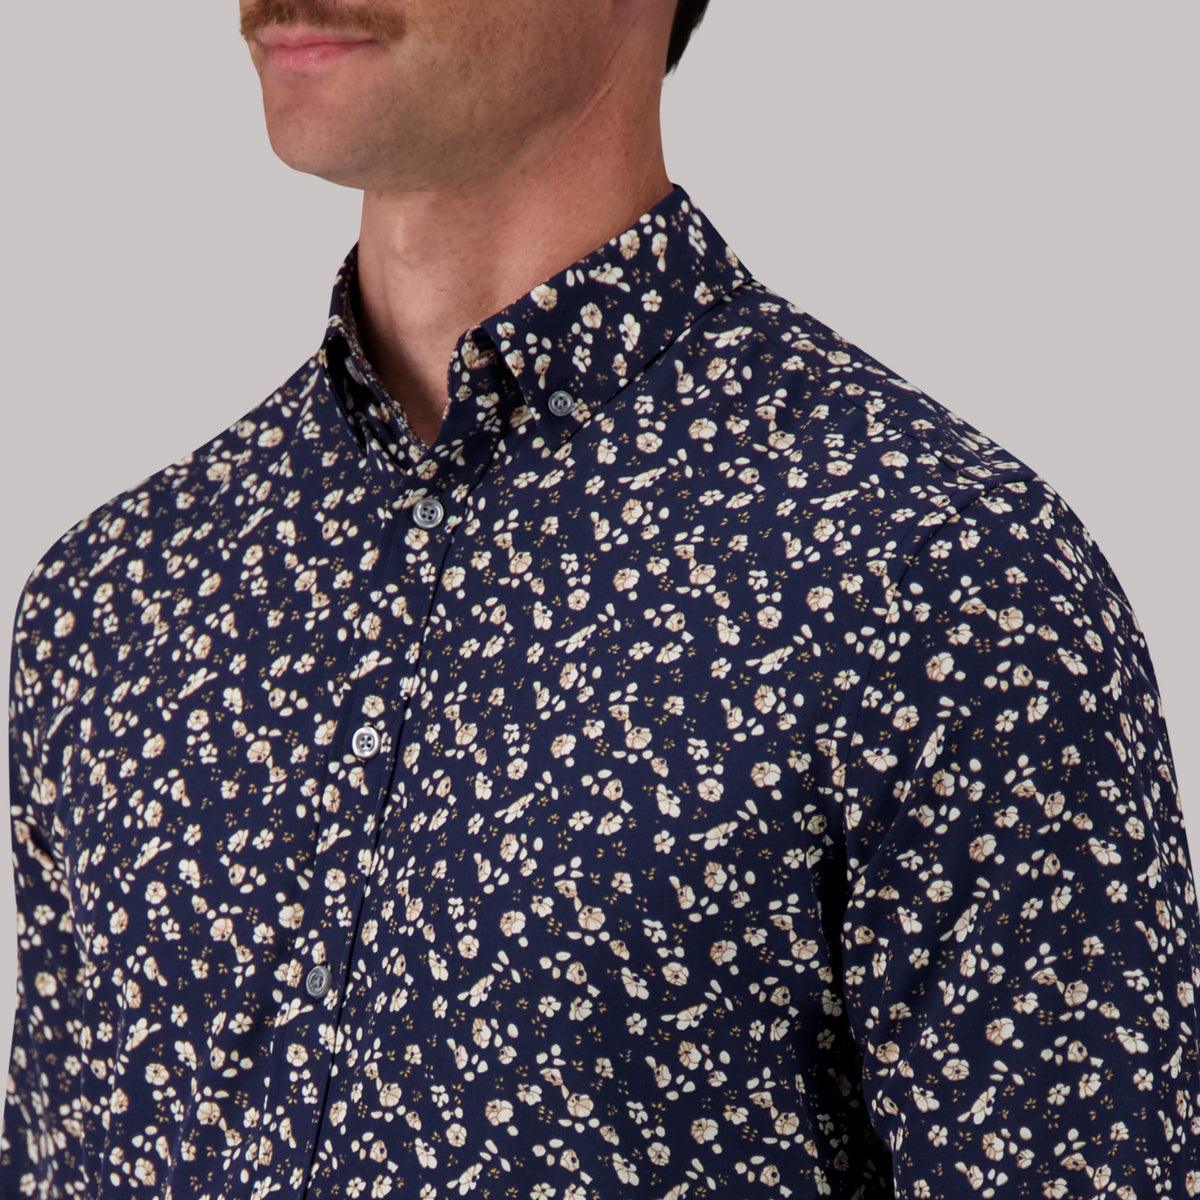 Model Front Up Close View of Long Sleeve 4-Way Sport Shirt with Floral Print in Navy